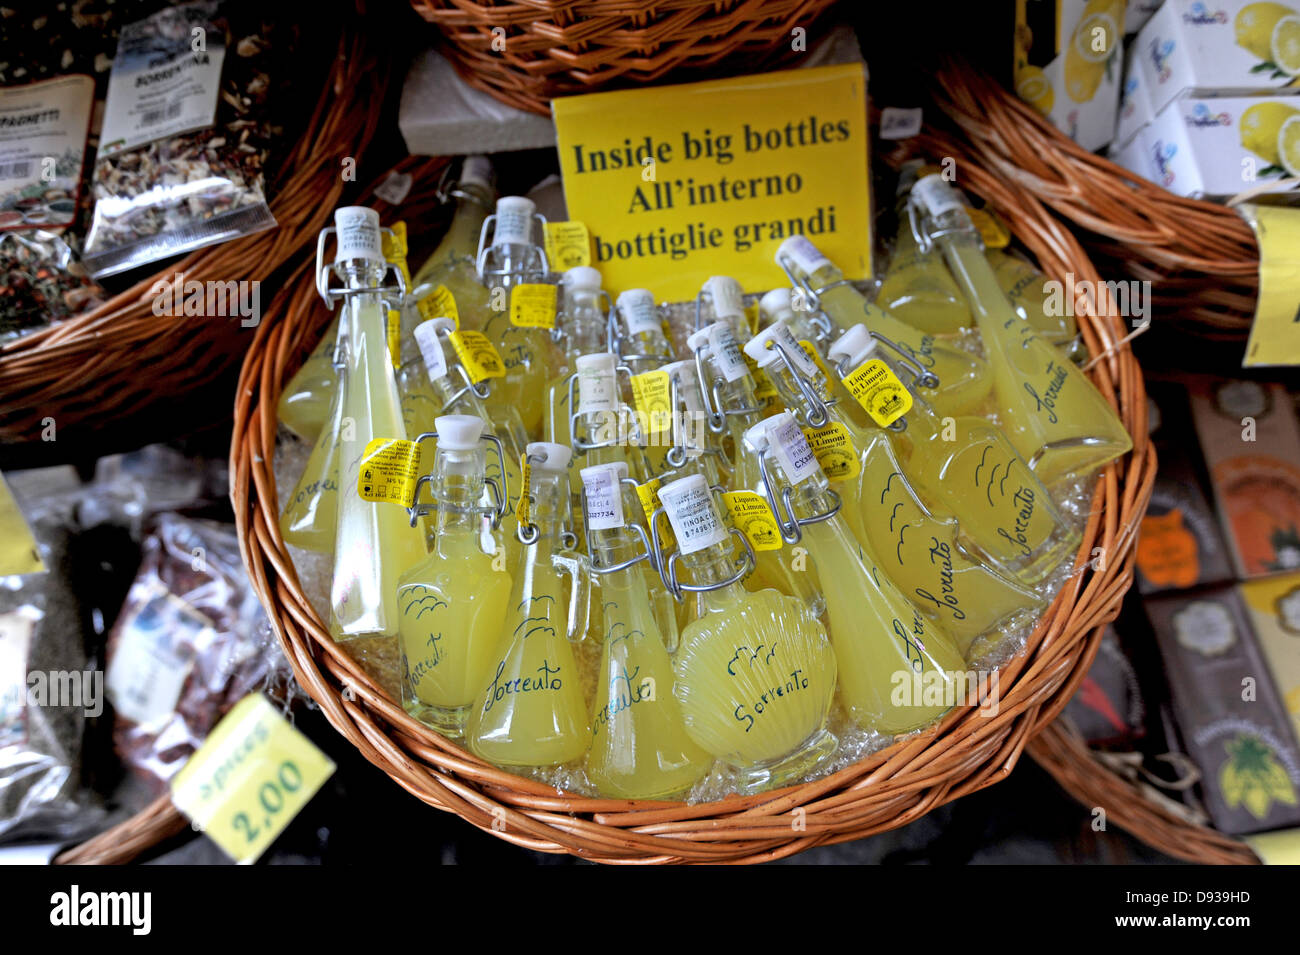 Bottles of Limoncello for sale inside a tourst gift shop in Sorrento Stock Photo